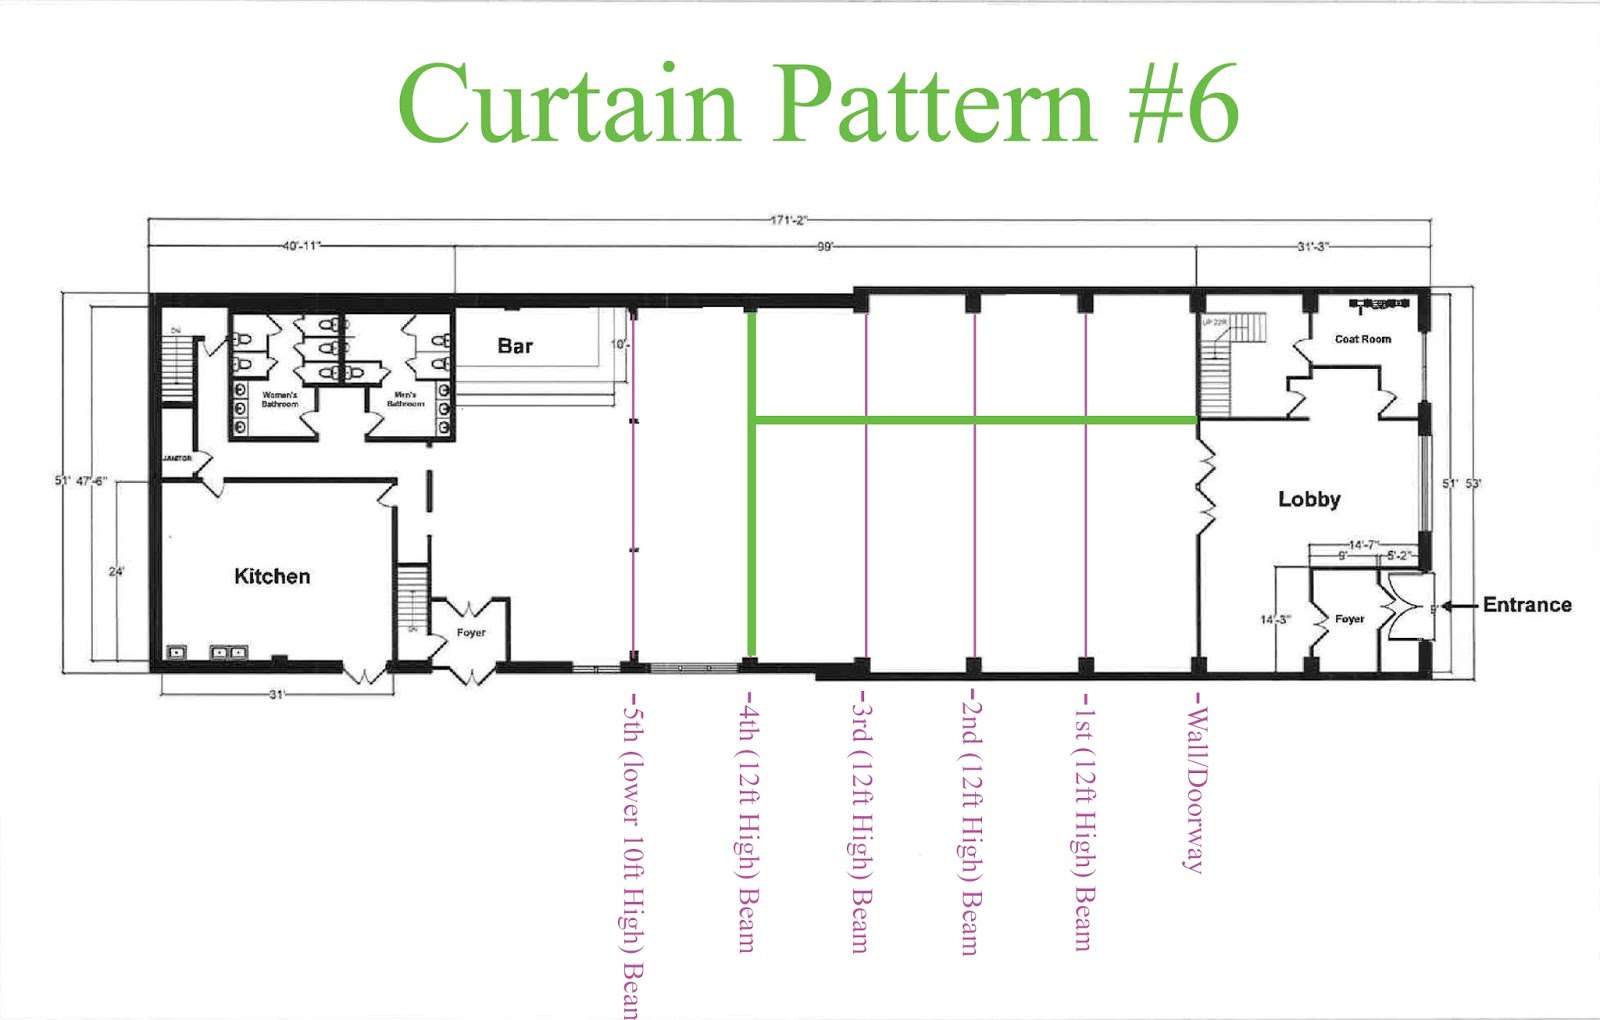 Curtains are hanging across the width of the Main Room at 26 Bridge under the 4th Beam and hanging the length of the room between 4th Bean and Entrance wall on the Bar-Side of The Main Room.